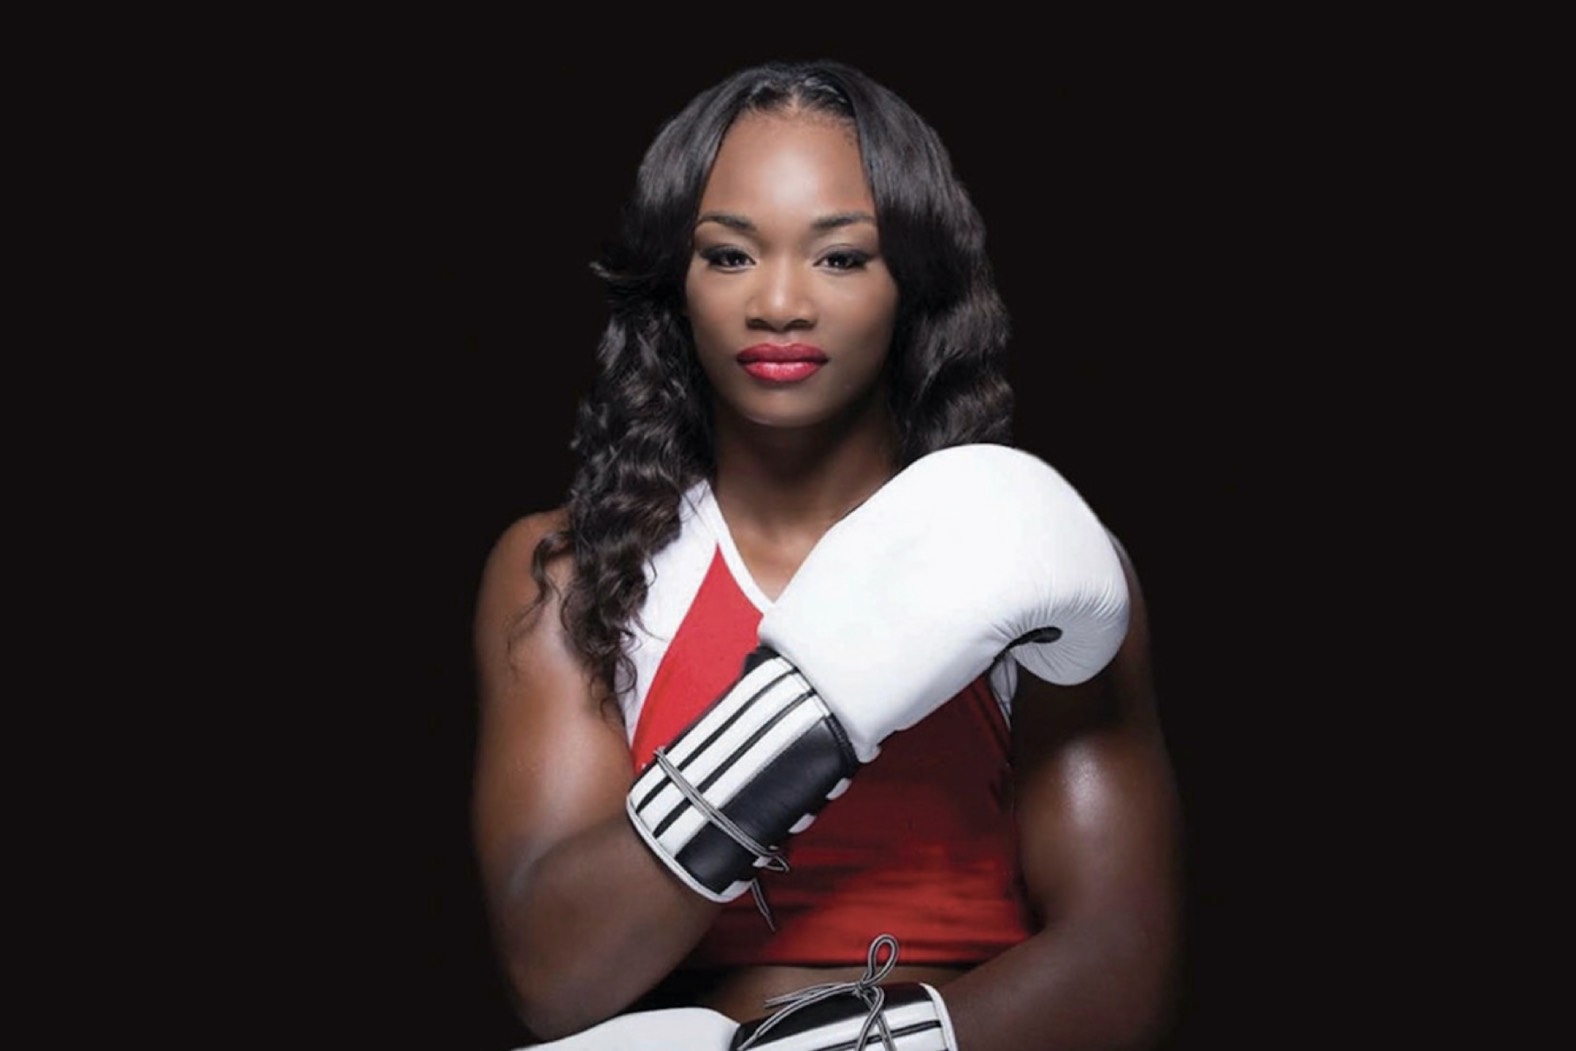 Claressa Shields proclaims herself to be the 'Greatest Woman Boxer